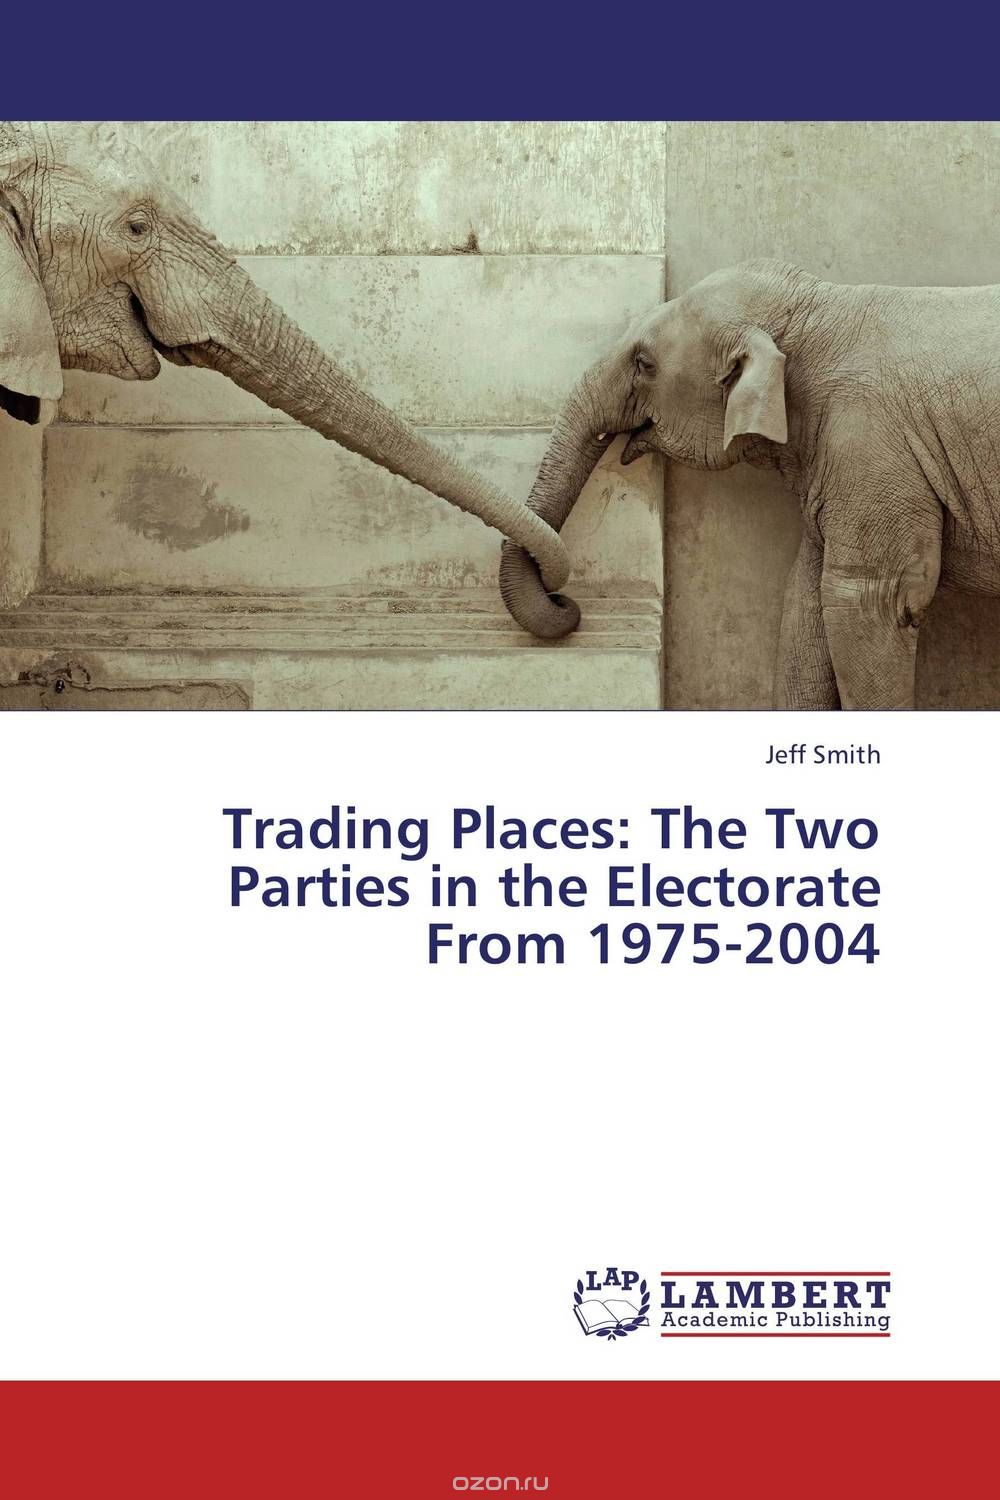 Trading Places: The Two Parties in the Electorate From 1975-2004